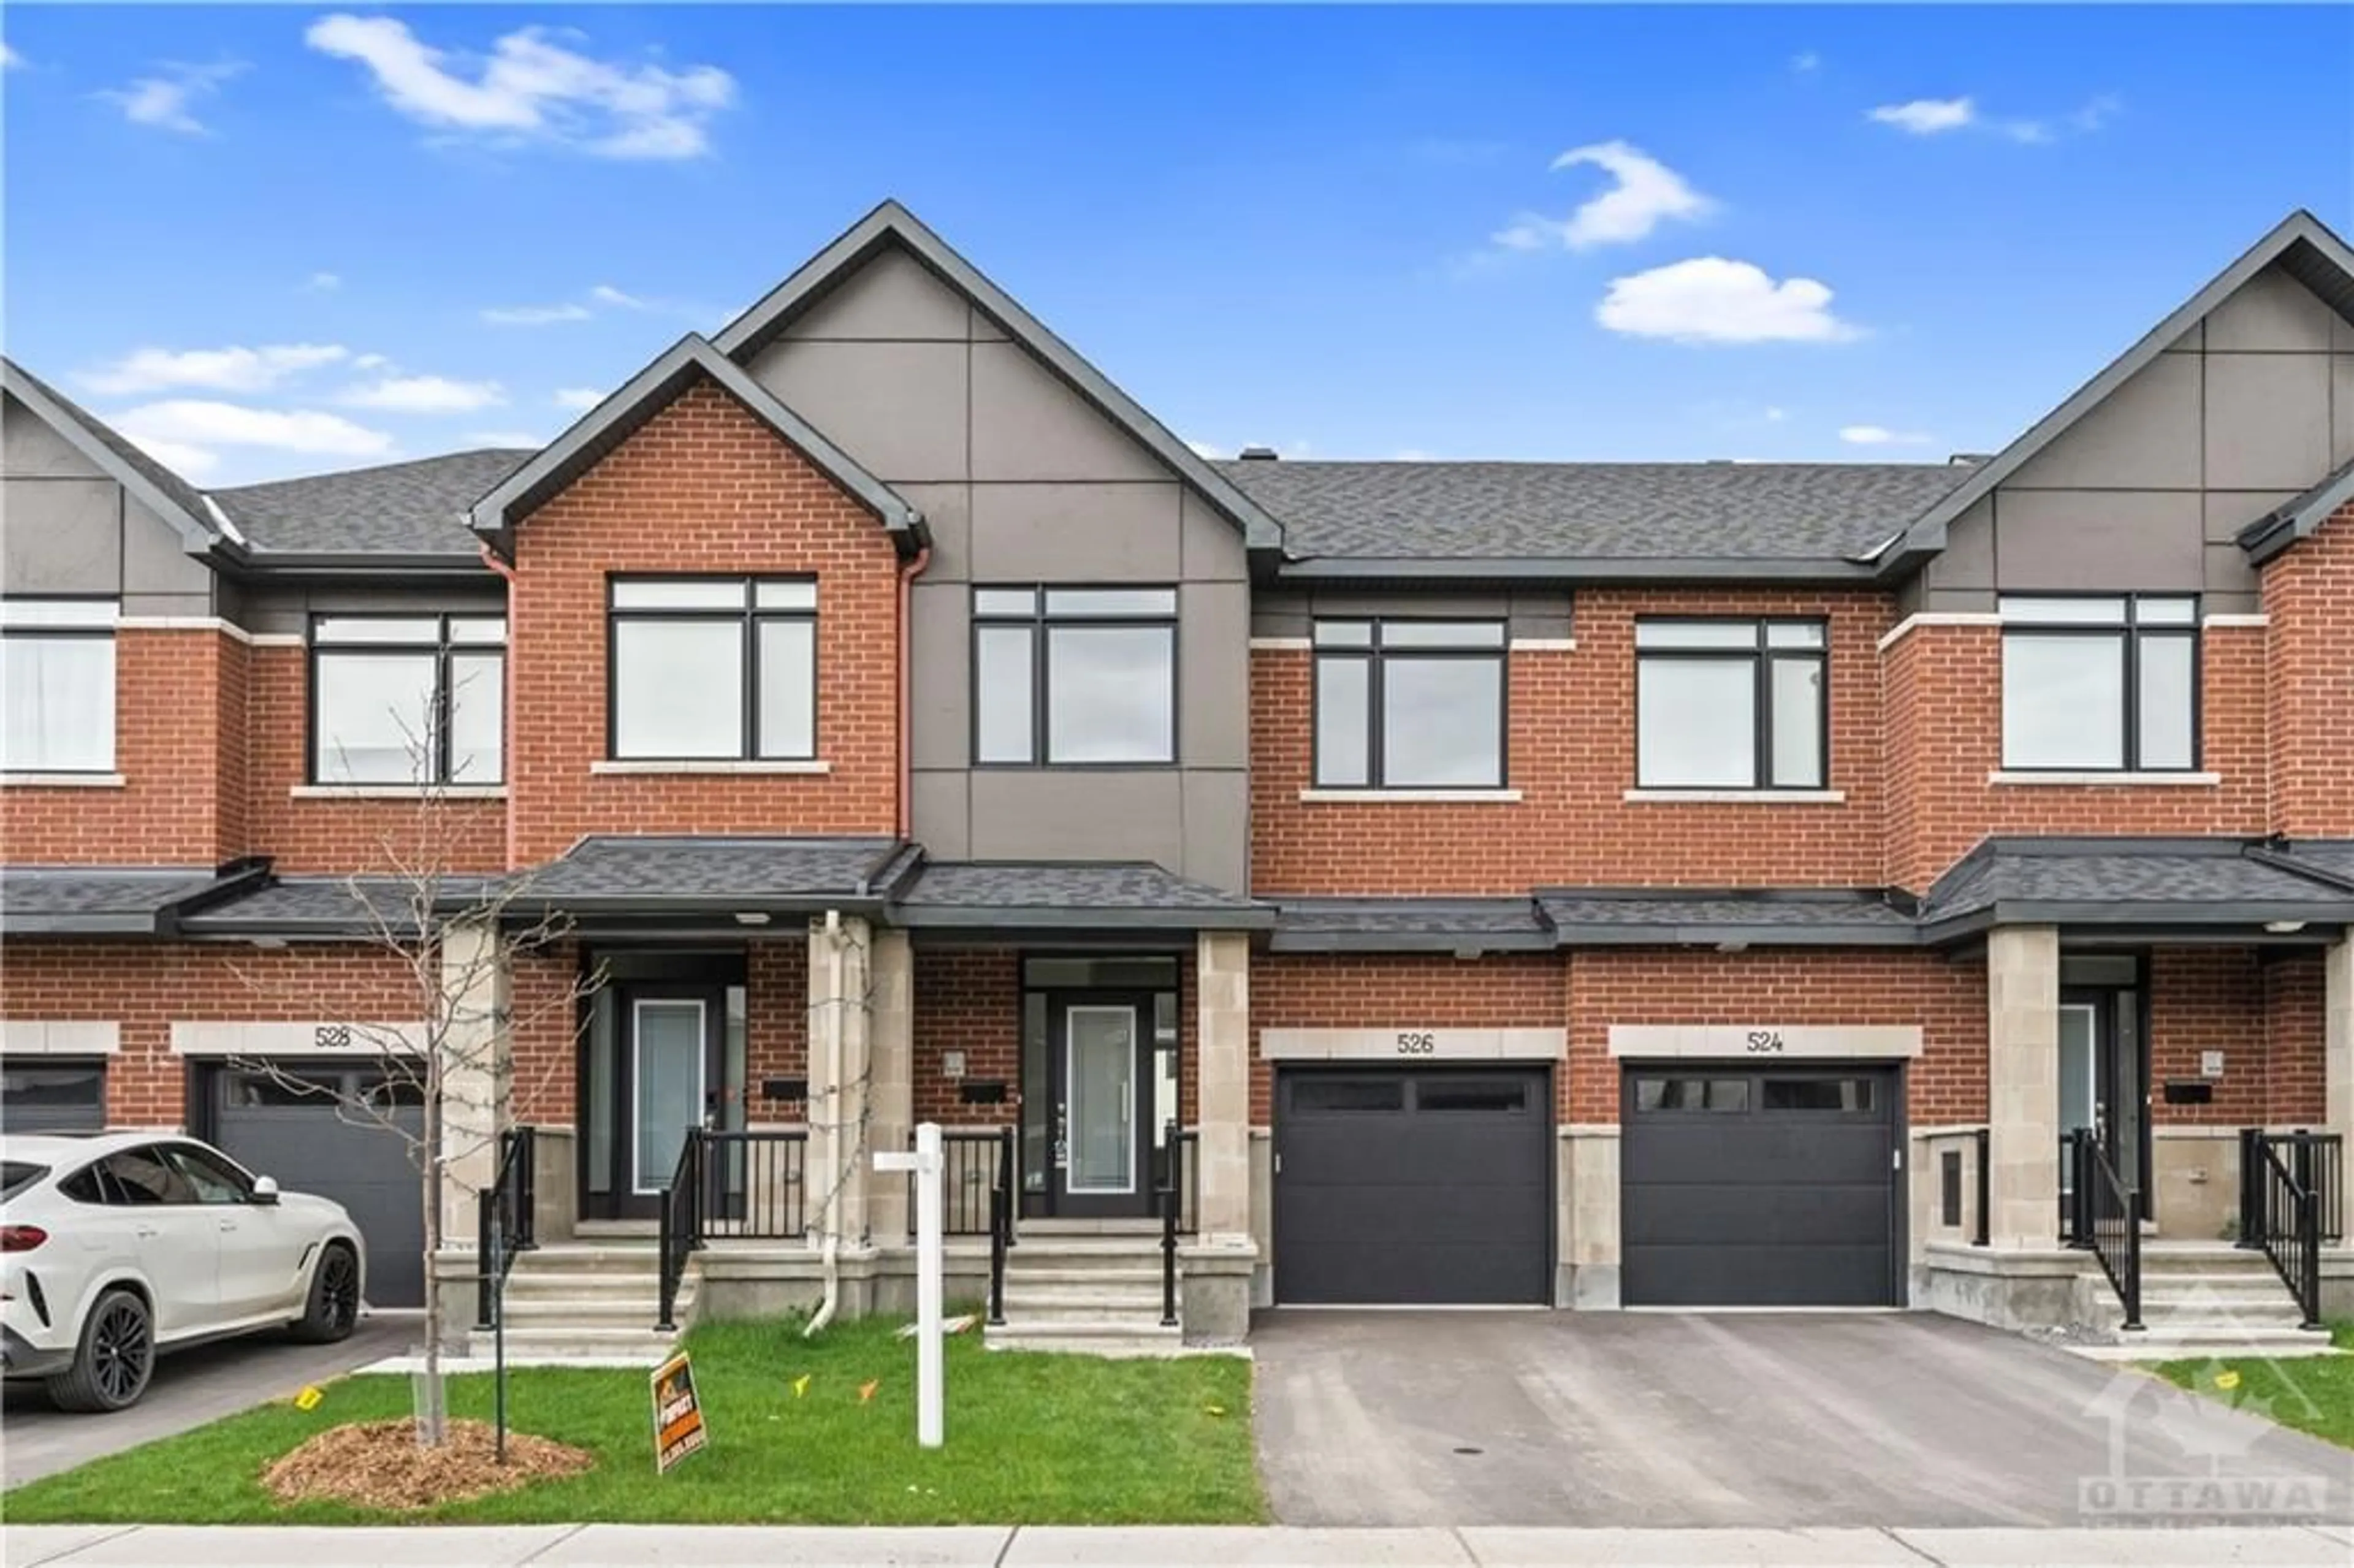 Home with brick exterior material for 526 CORRETTO Pl, Ottawa Ontario K2J 6Z1